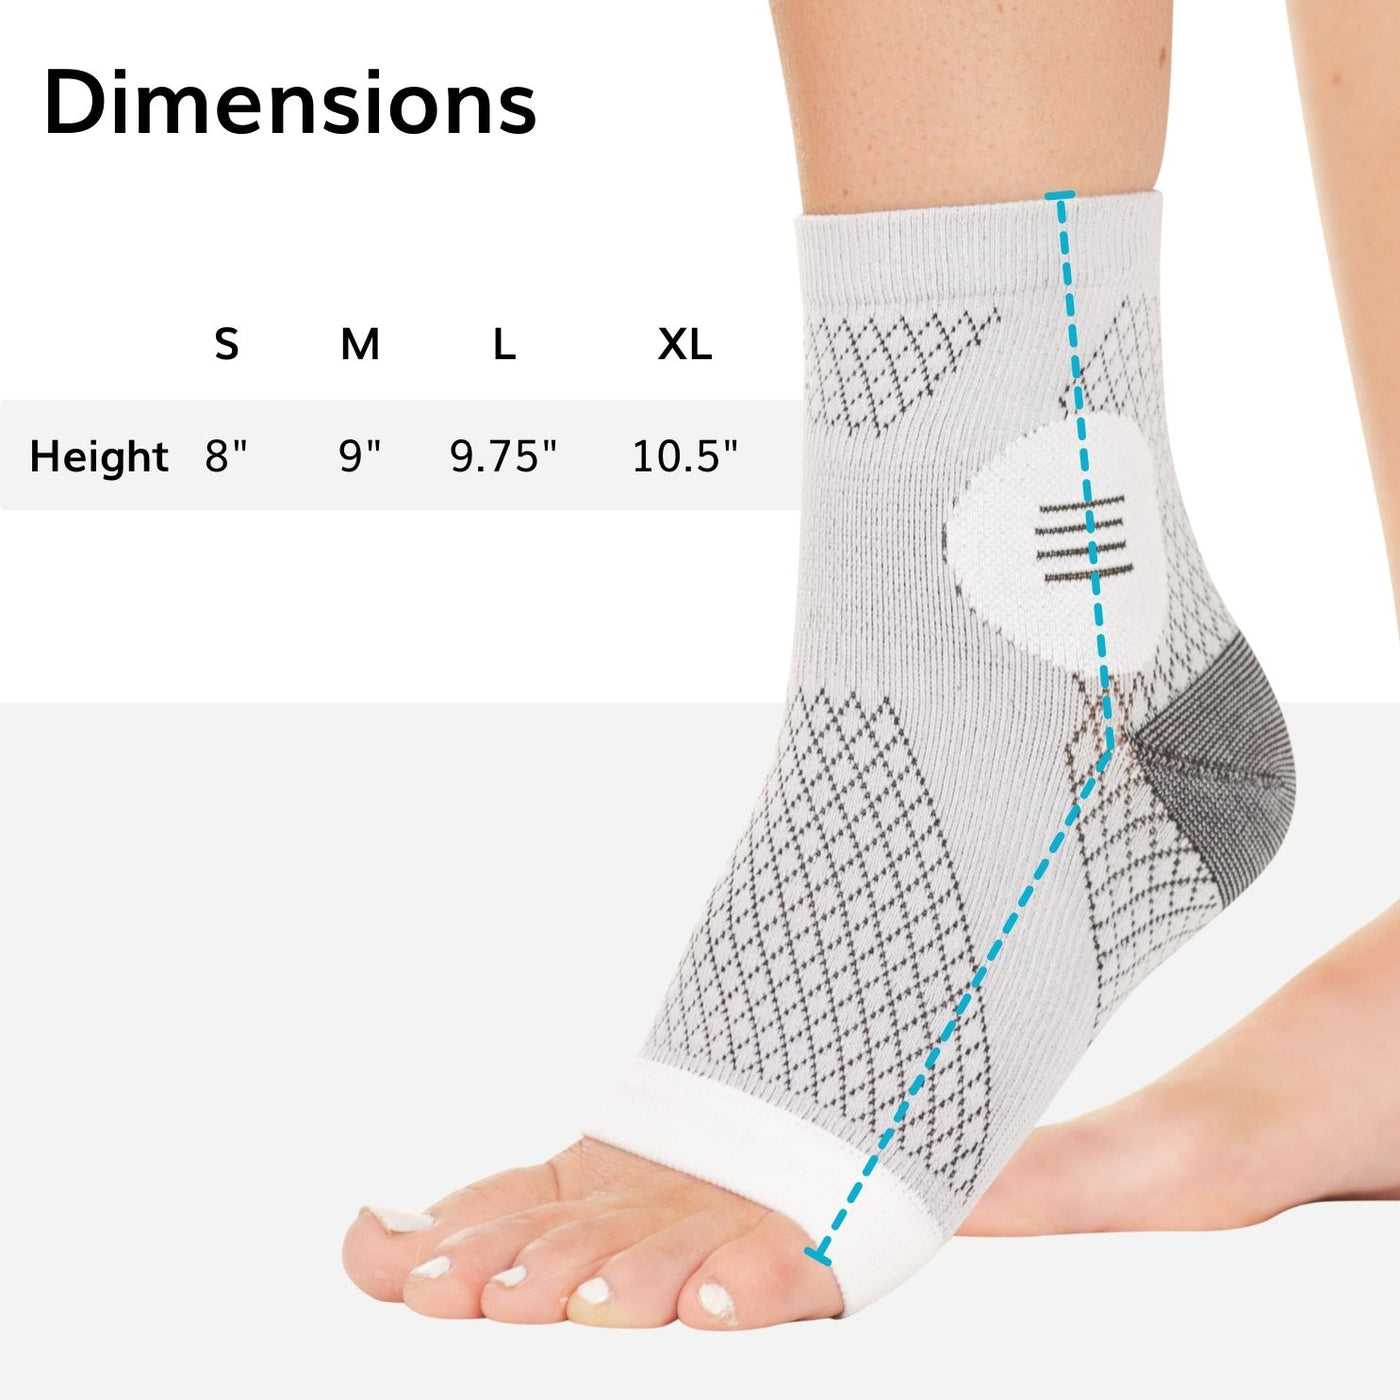 Our diabetic open toe socks are nine inches tall